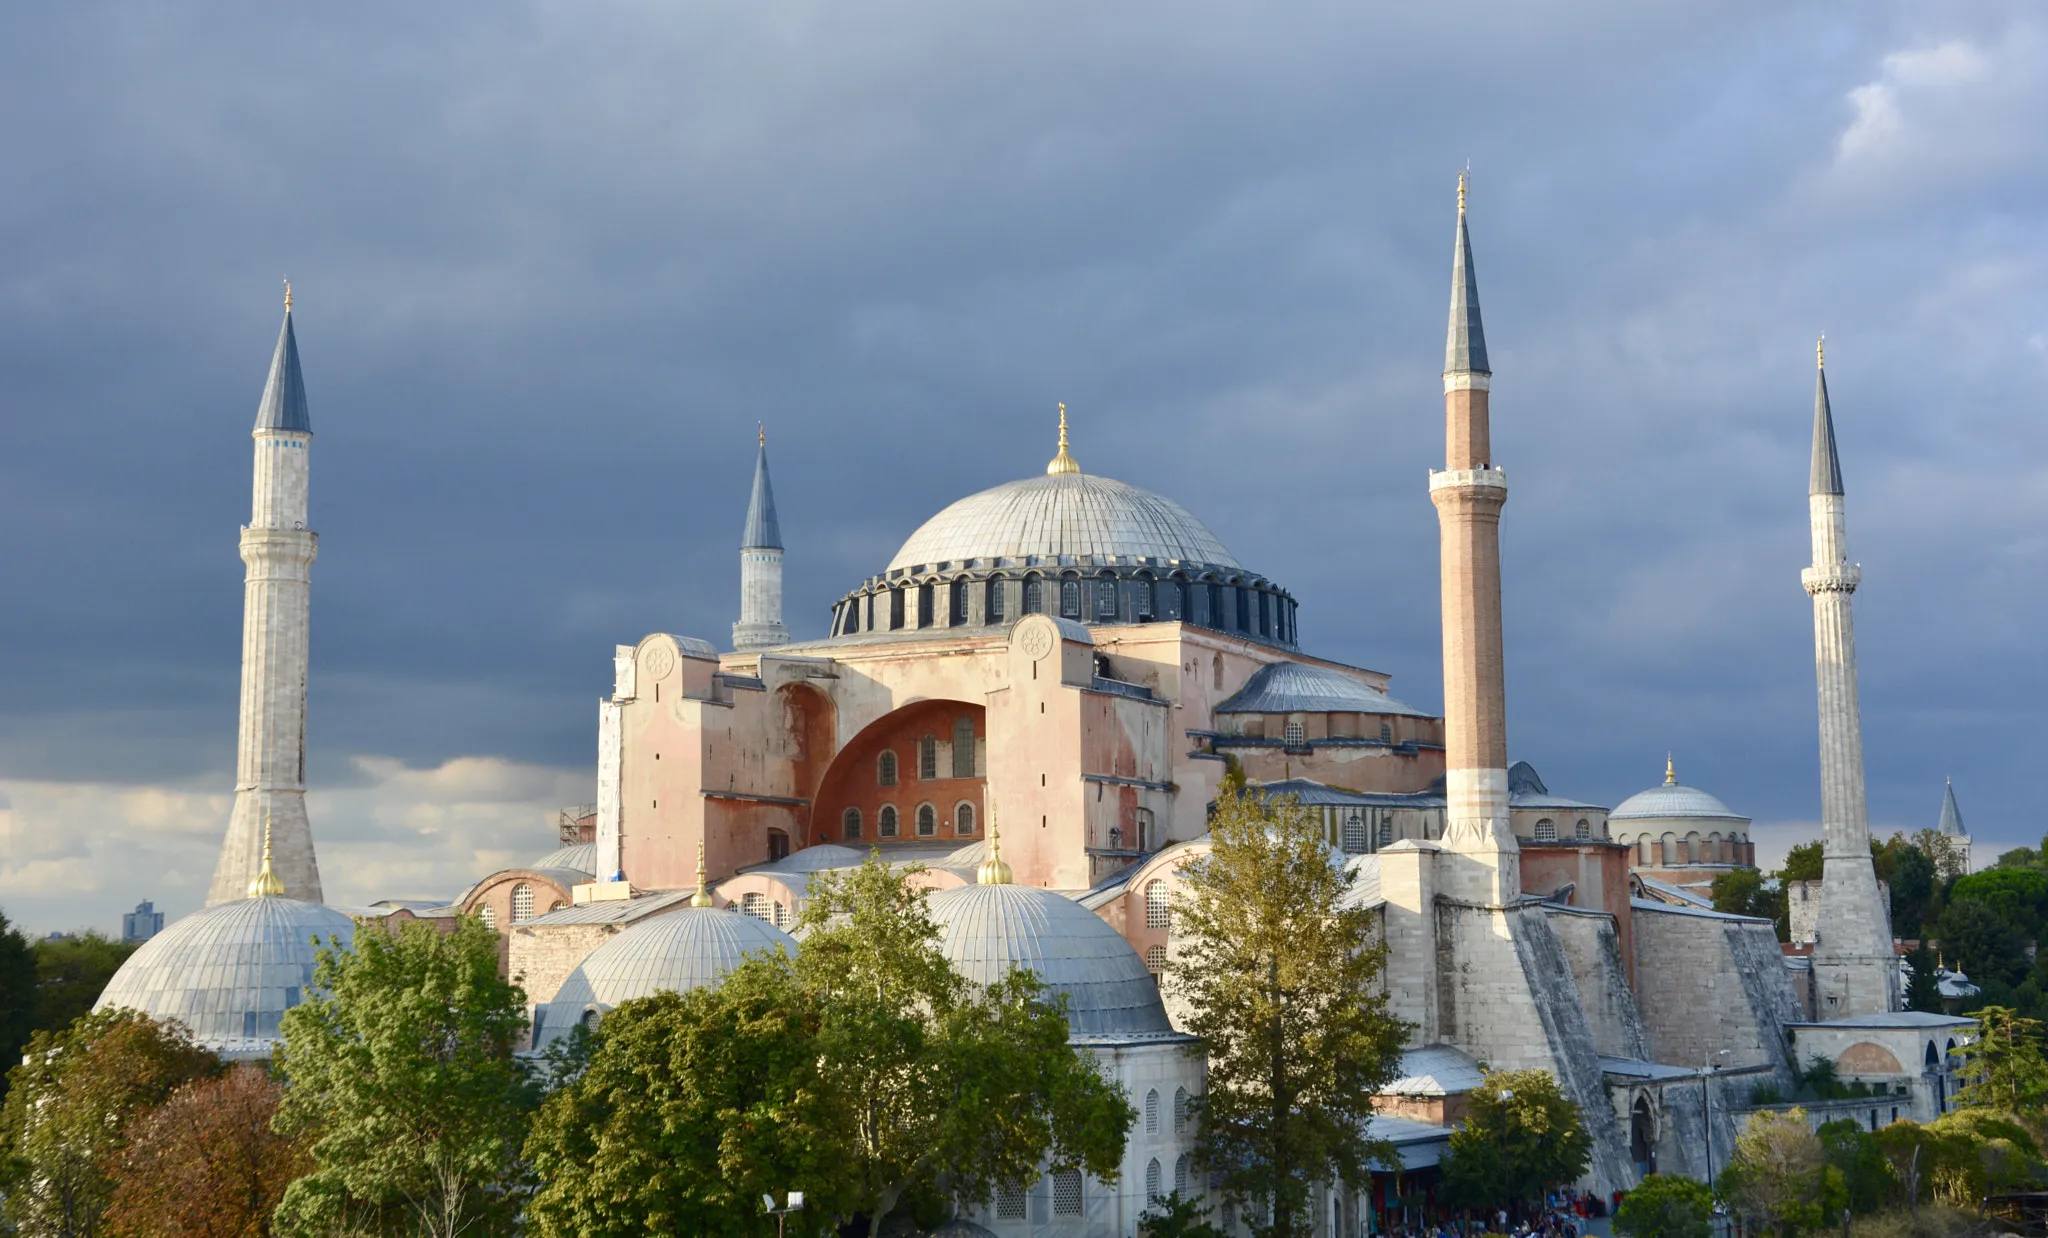 President Recep Erdogan in 2020 converted the former Byzantine church, the Hagia Sophia back into a mosque.?w=200&h=150